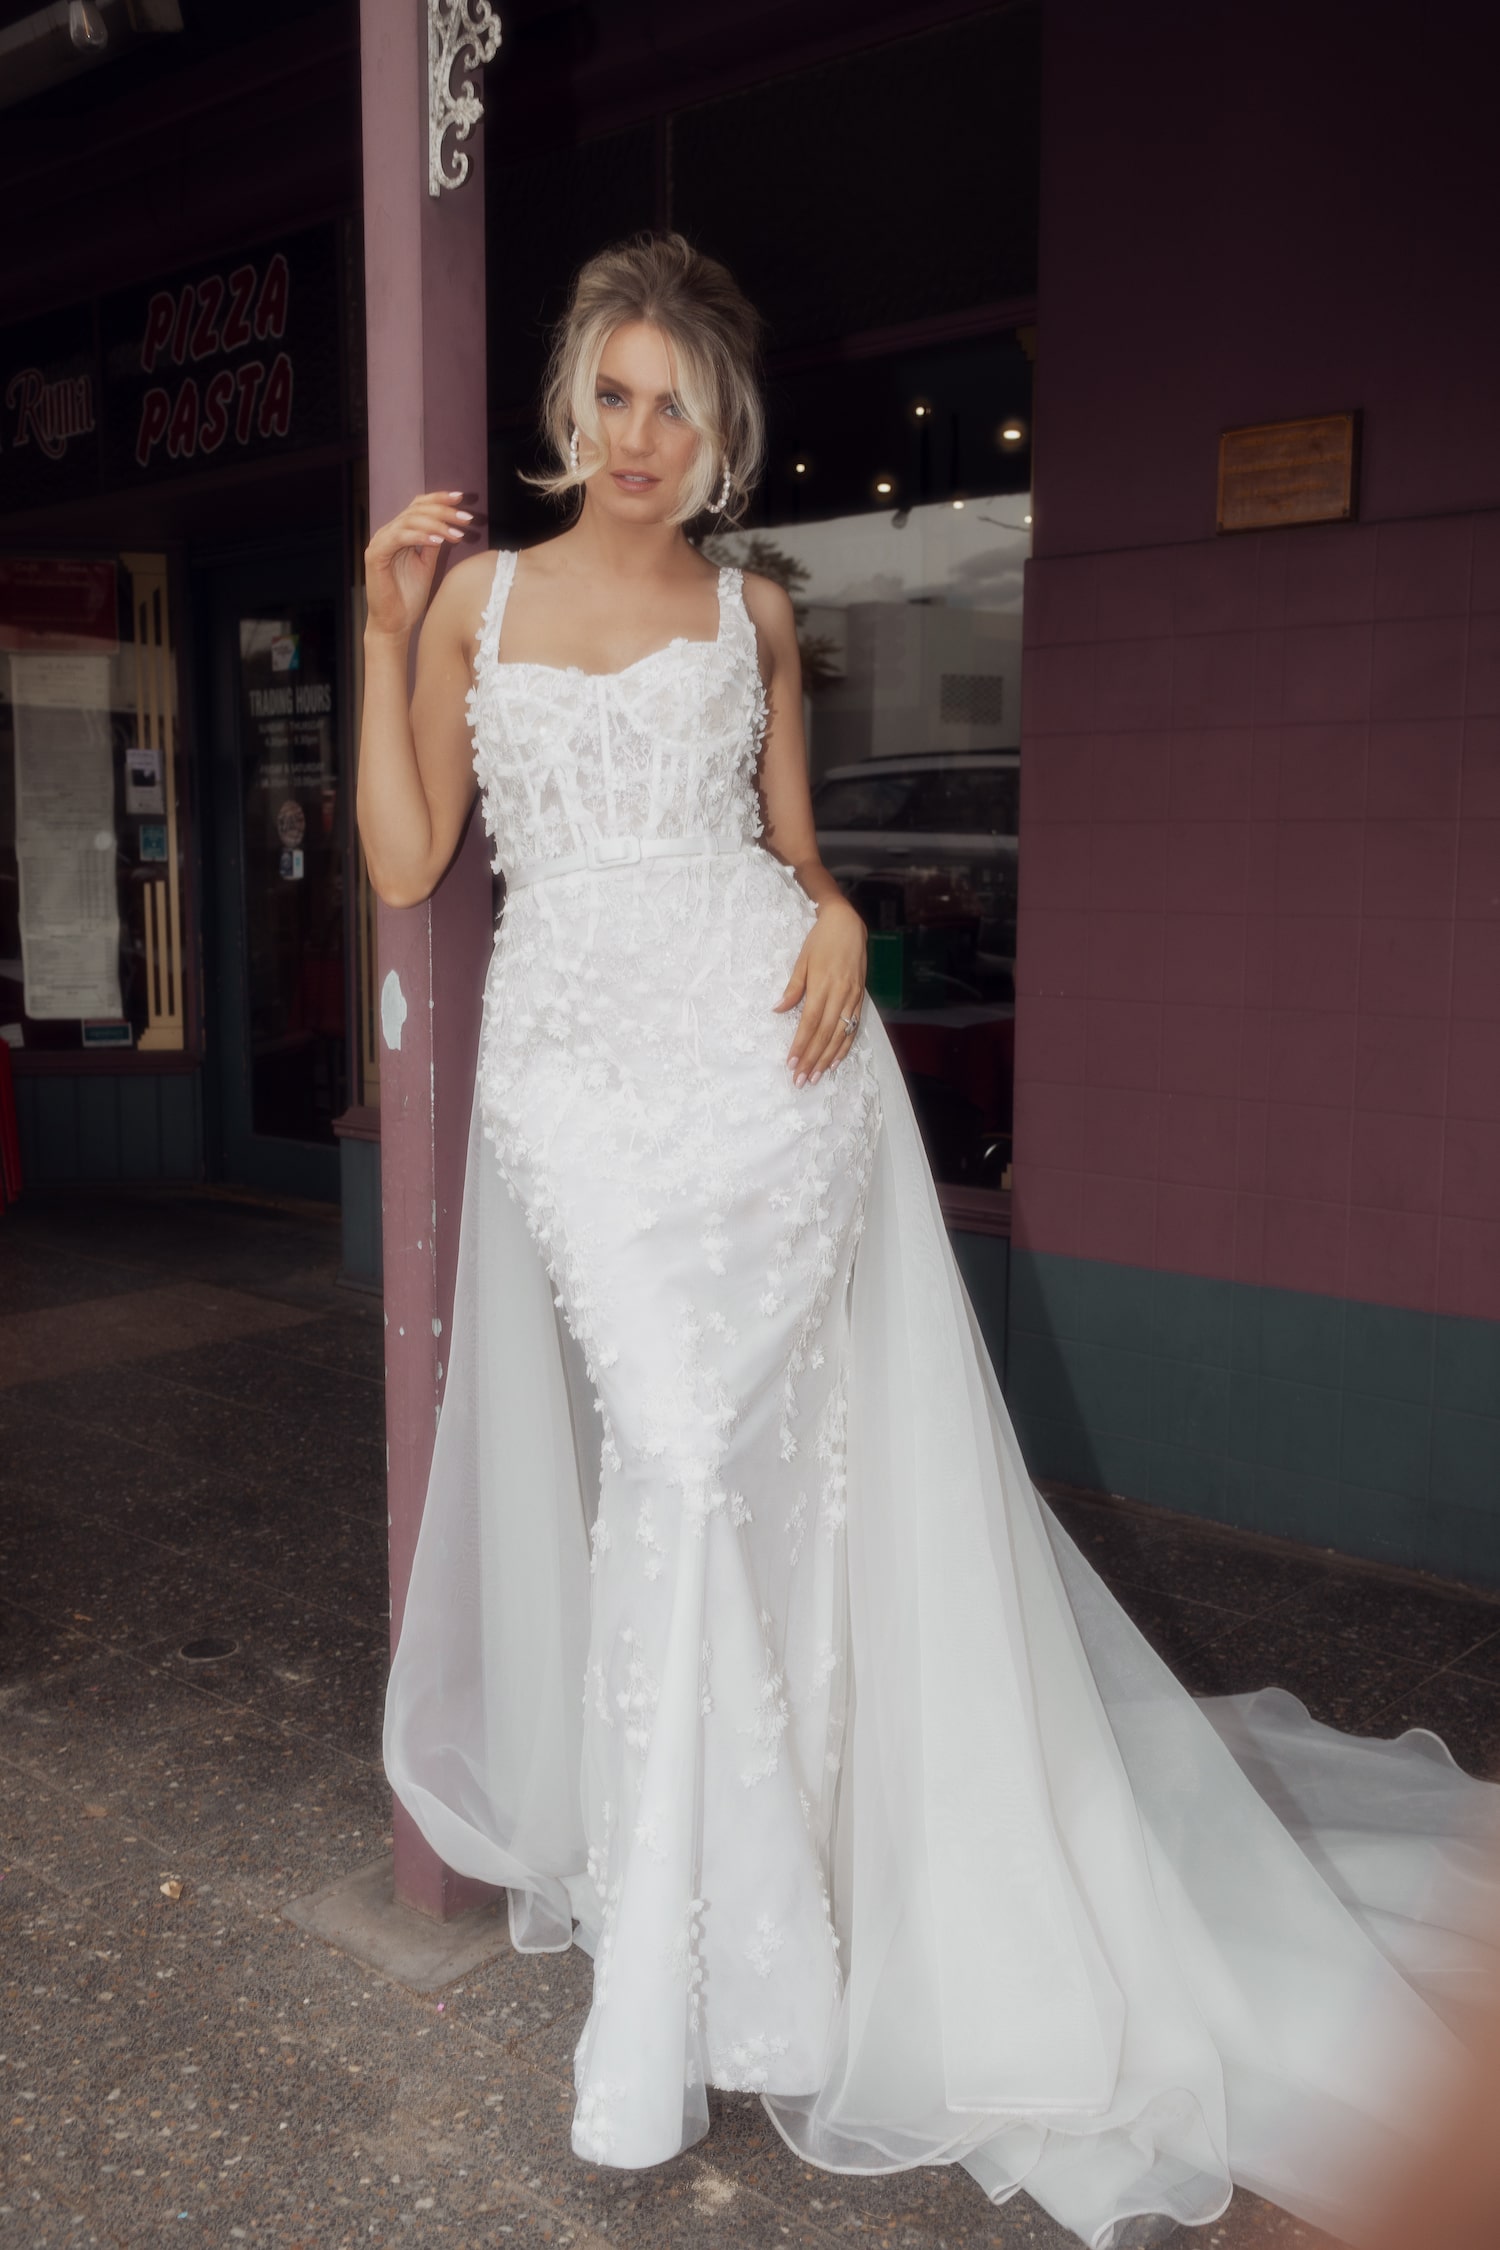 Model posing out the front of Italian cafe wearing the Romantica gown.